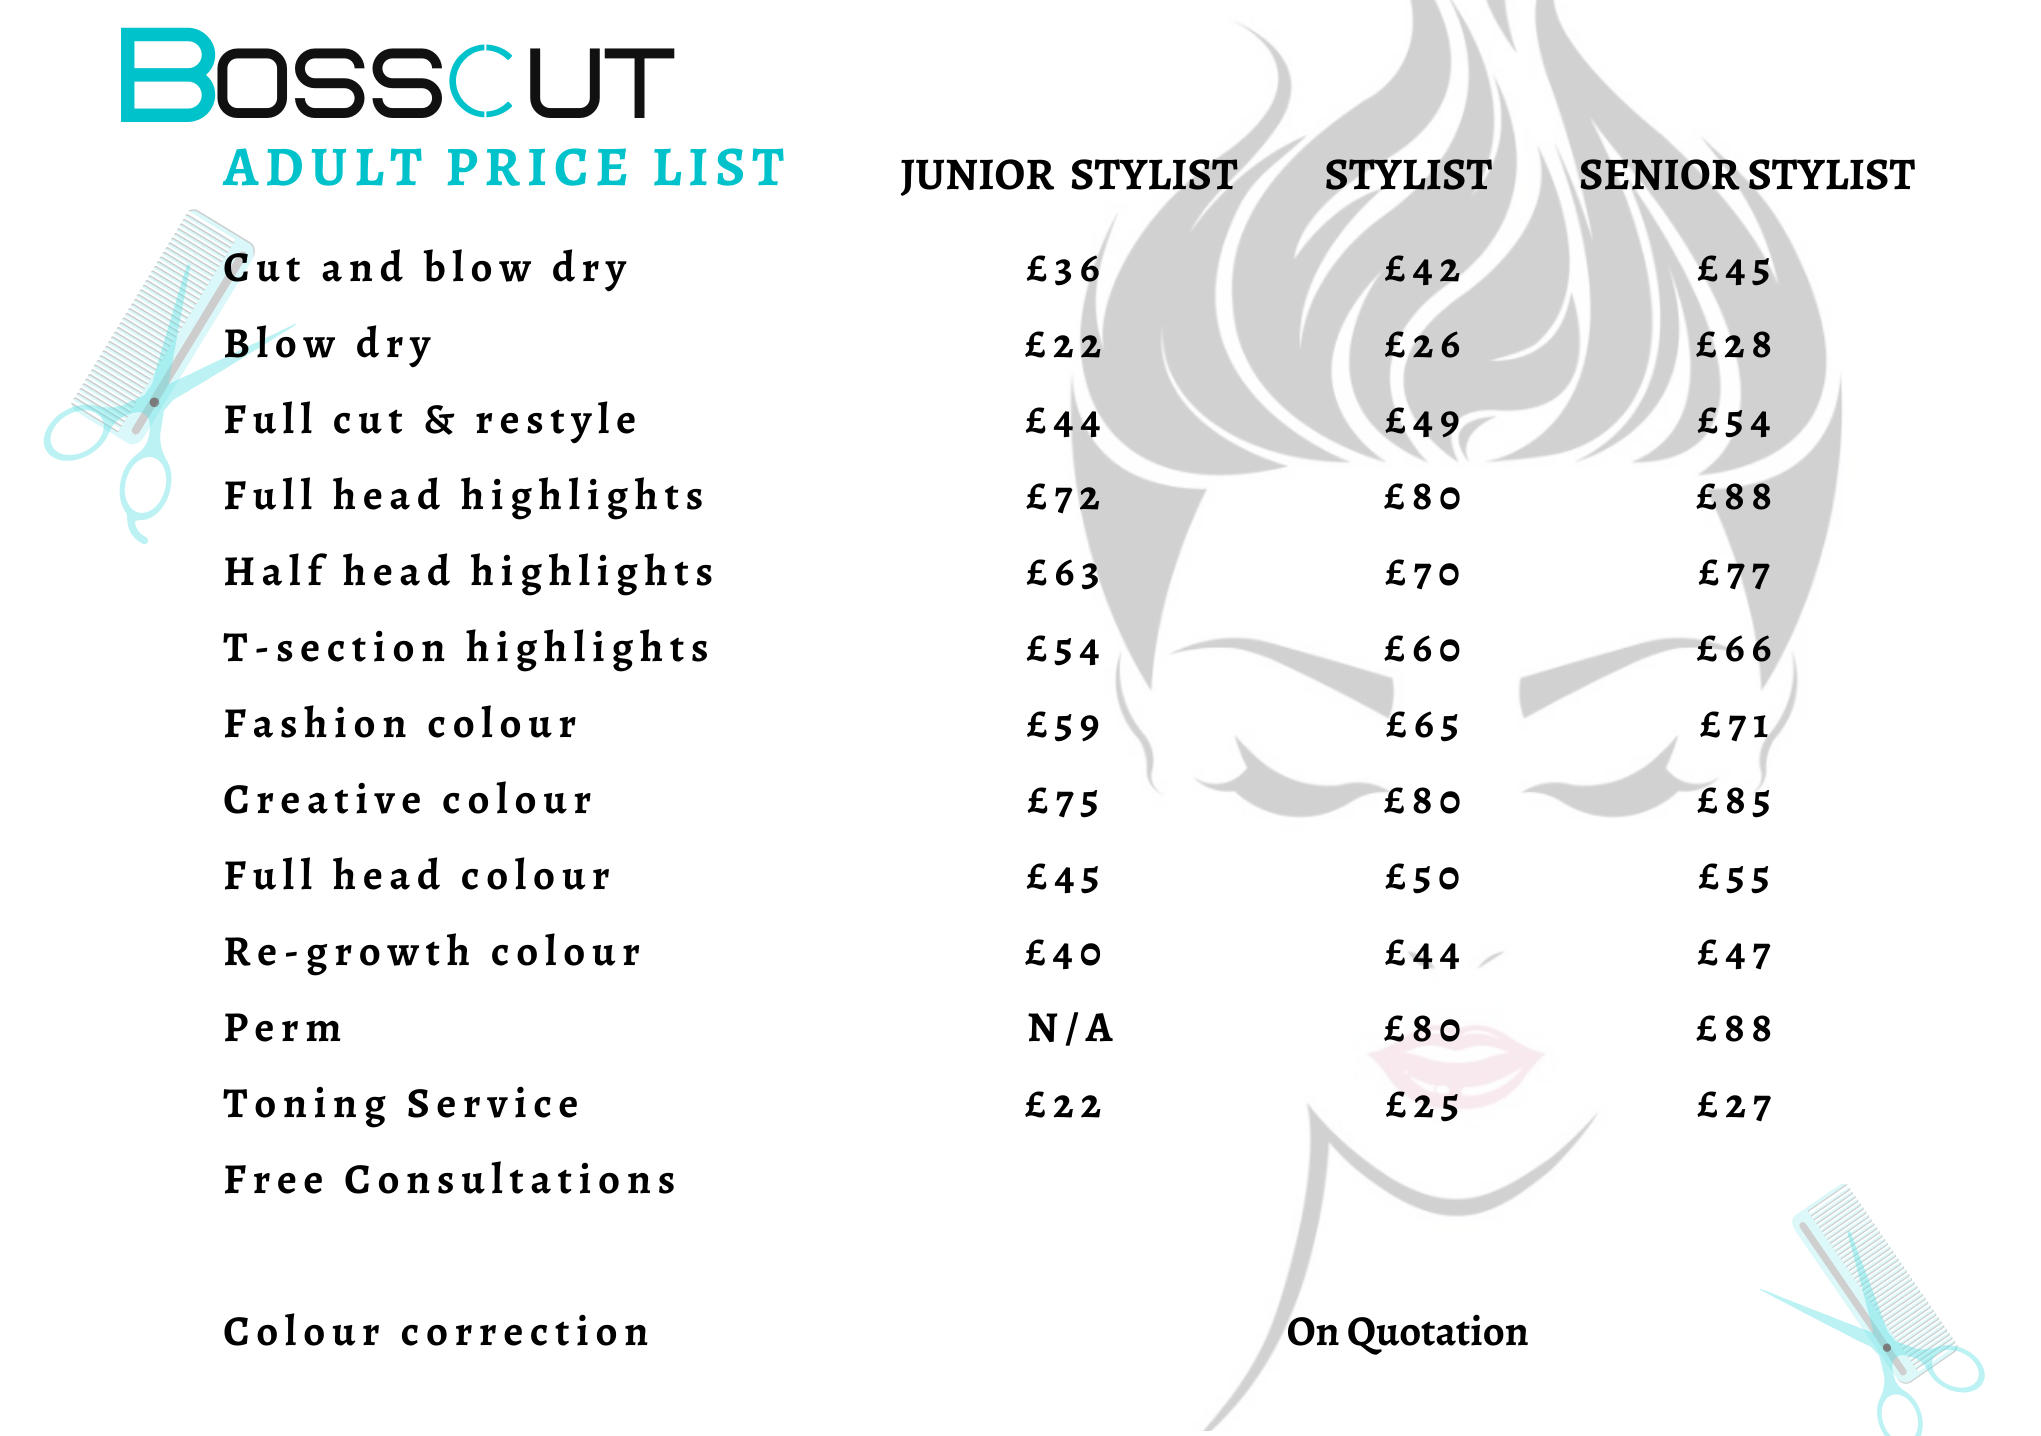 Bosscut Barbers and Hairdressers pricing